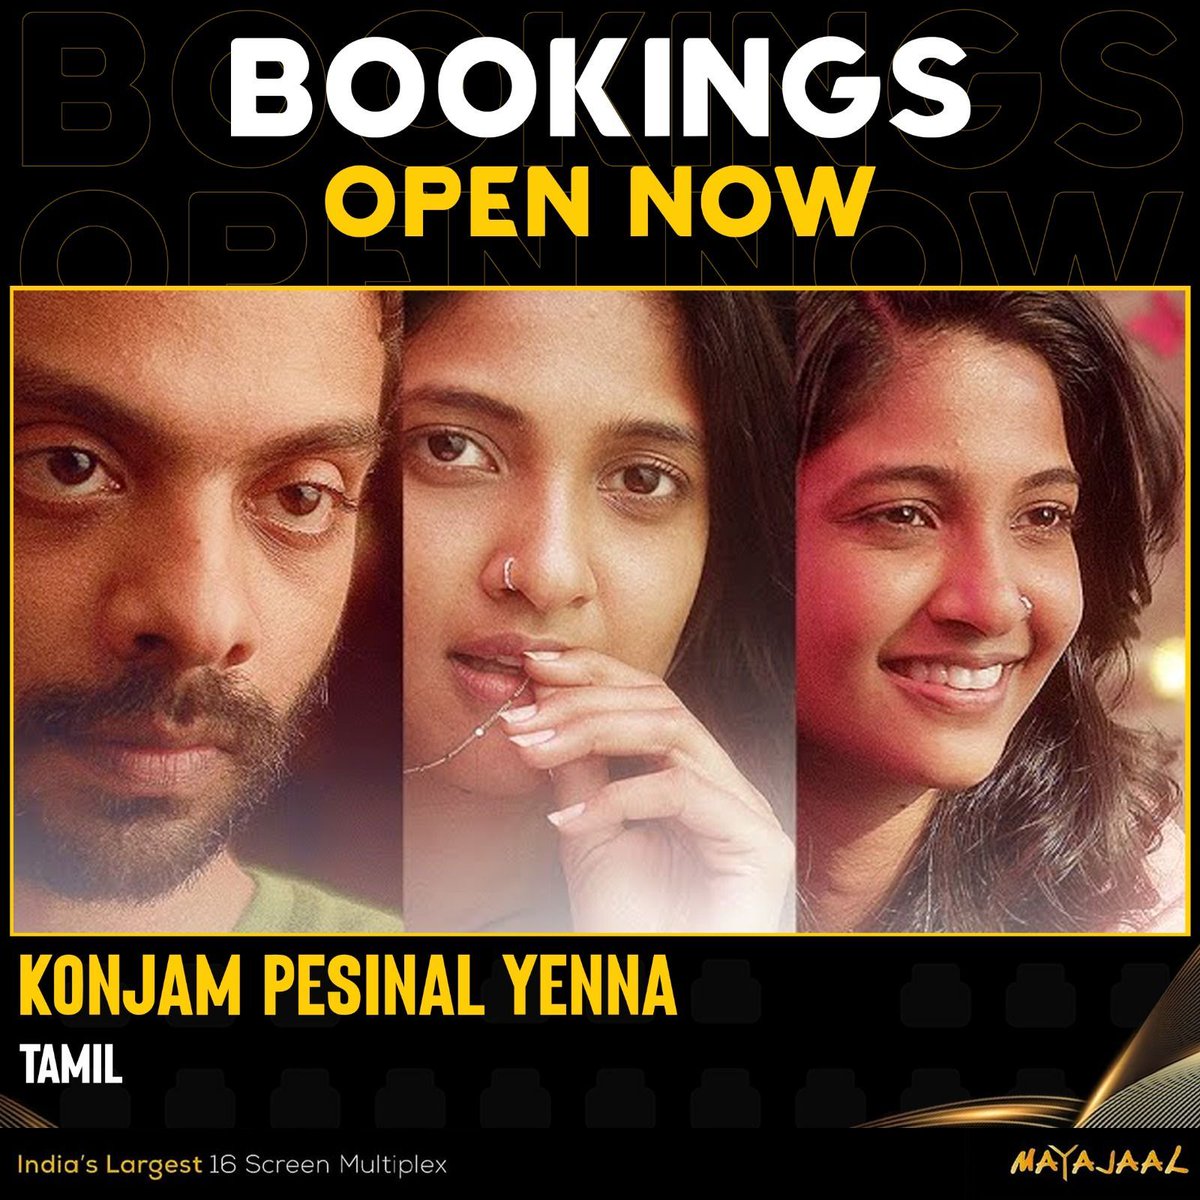 #KonjamPesinaalEnna - a romcom that is all about love, laughter, and everything in between. ❤️ Bookings open for #KonjamPesinaalEnna (Tamil) at #Mayajaal 🎟️bit.ly/3sVdbqD #KeerthiPandian #VinothKishan